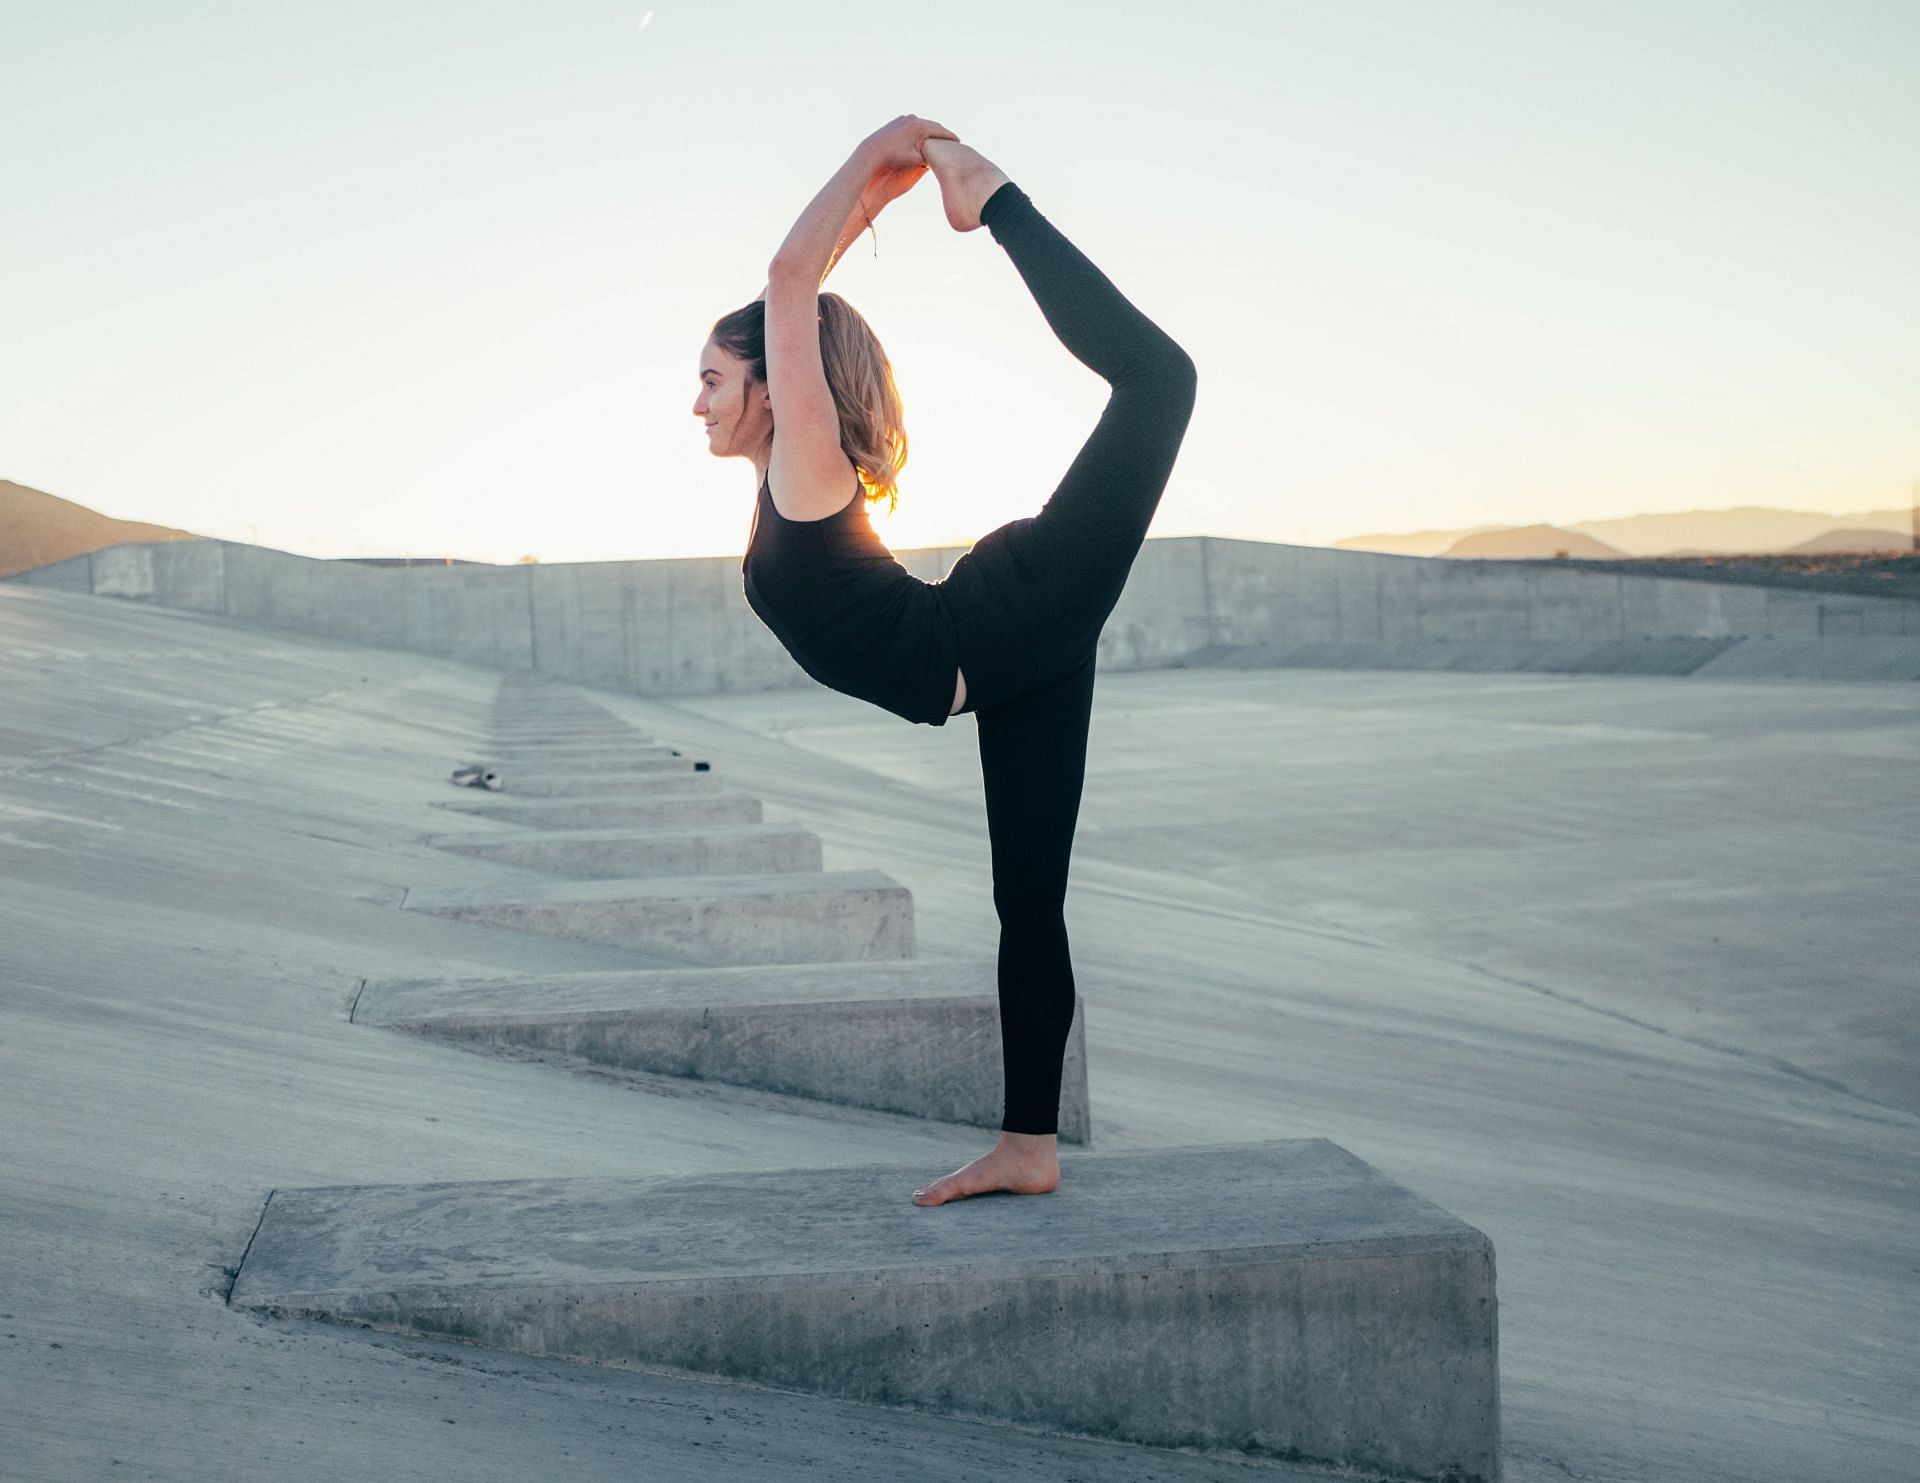 The 9 Best Yoga Poses for Better Balance - SilverSneakers